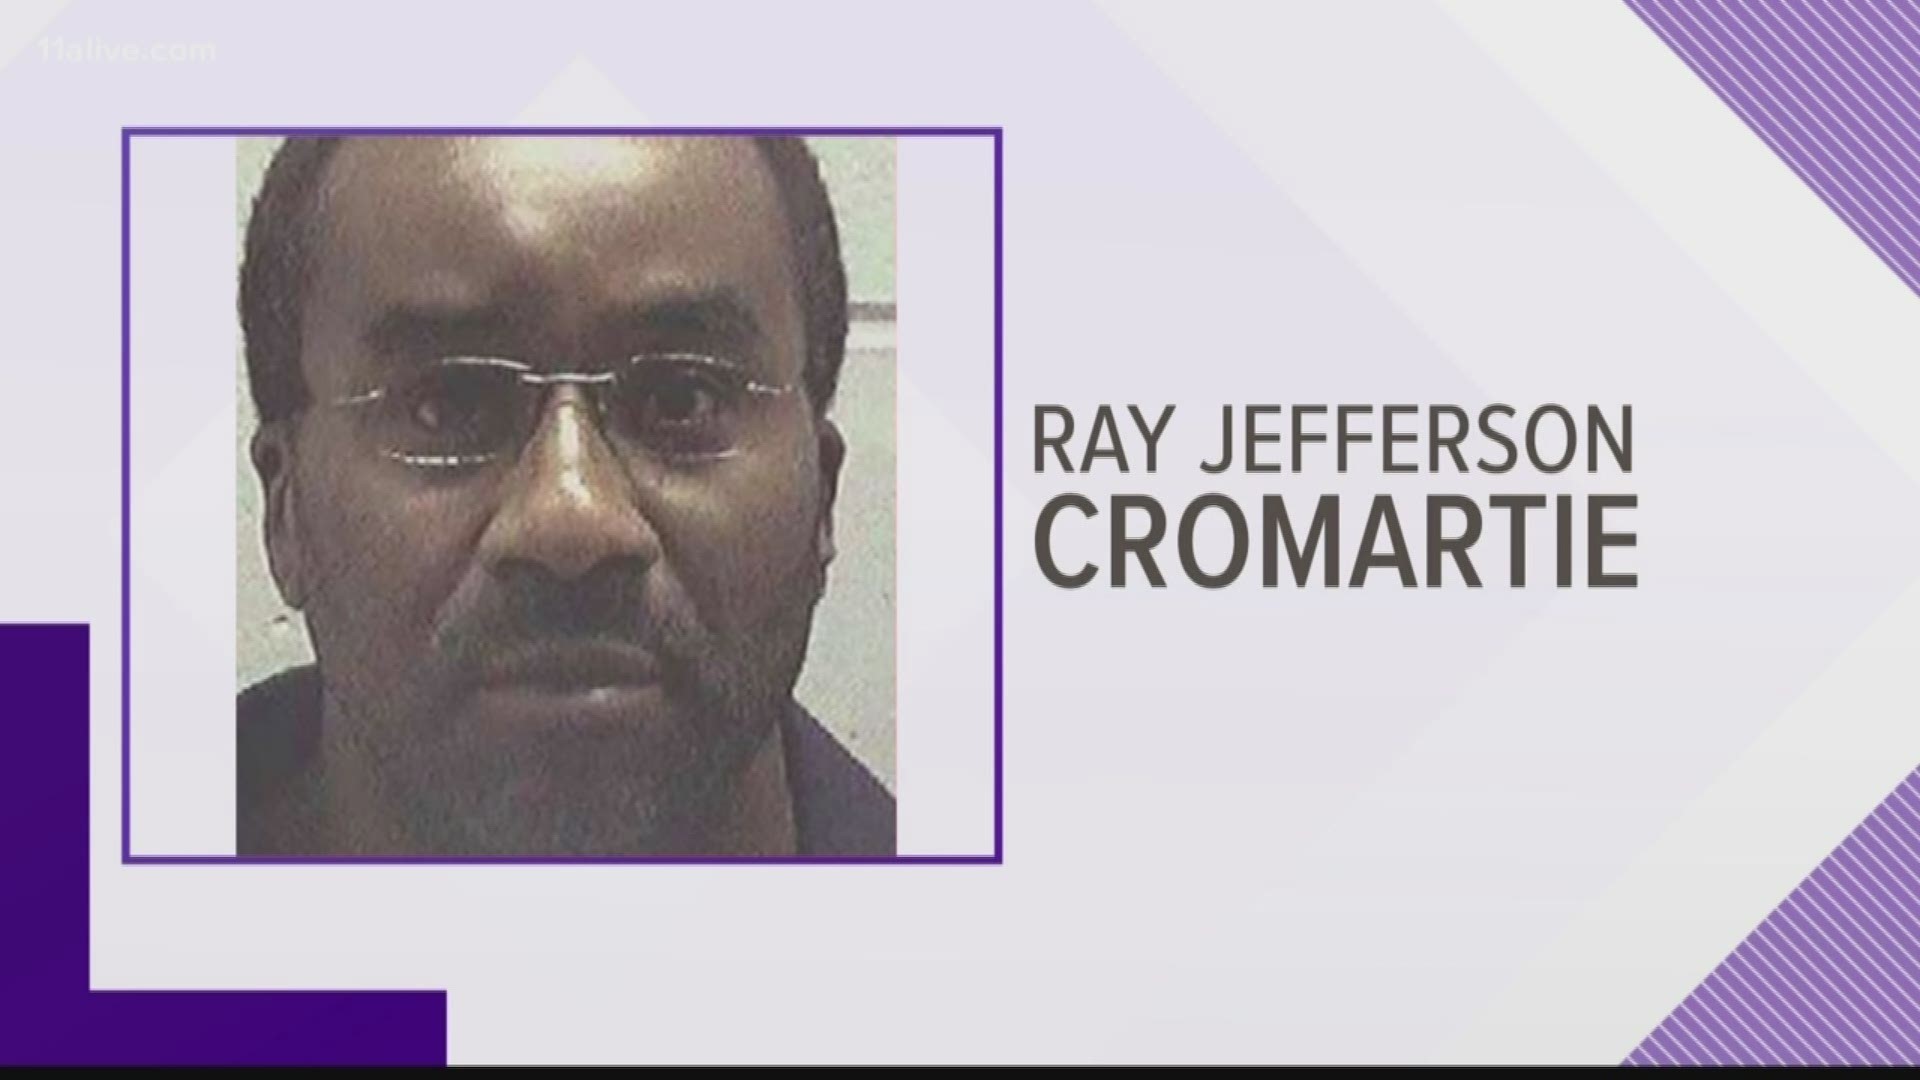 Ray Jefferson Cromartie faces a lethal injection for the April 1994 slaying of Richard Slysz at a convenience store in Thomasville.